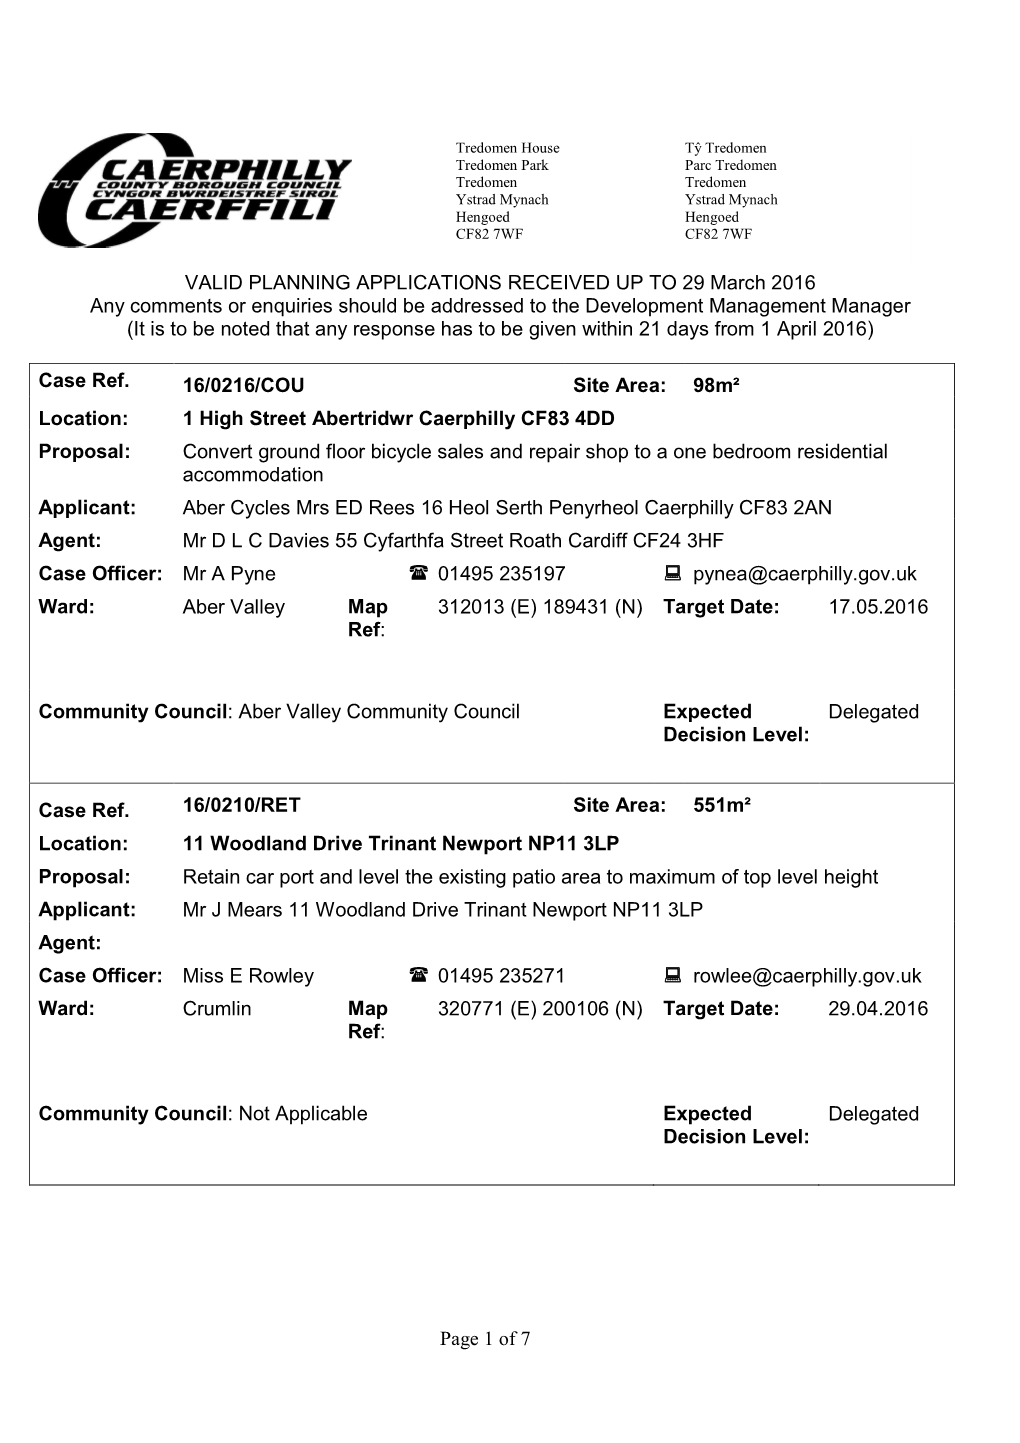 Page 1 of 7 VALID PLANNING APPLICATIONS RECEIVED up TO